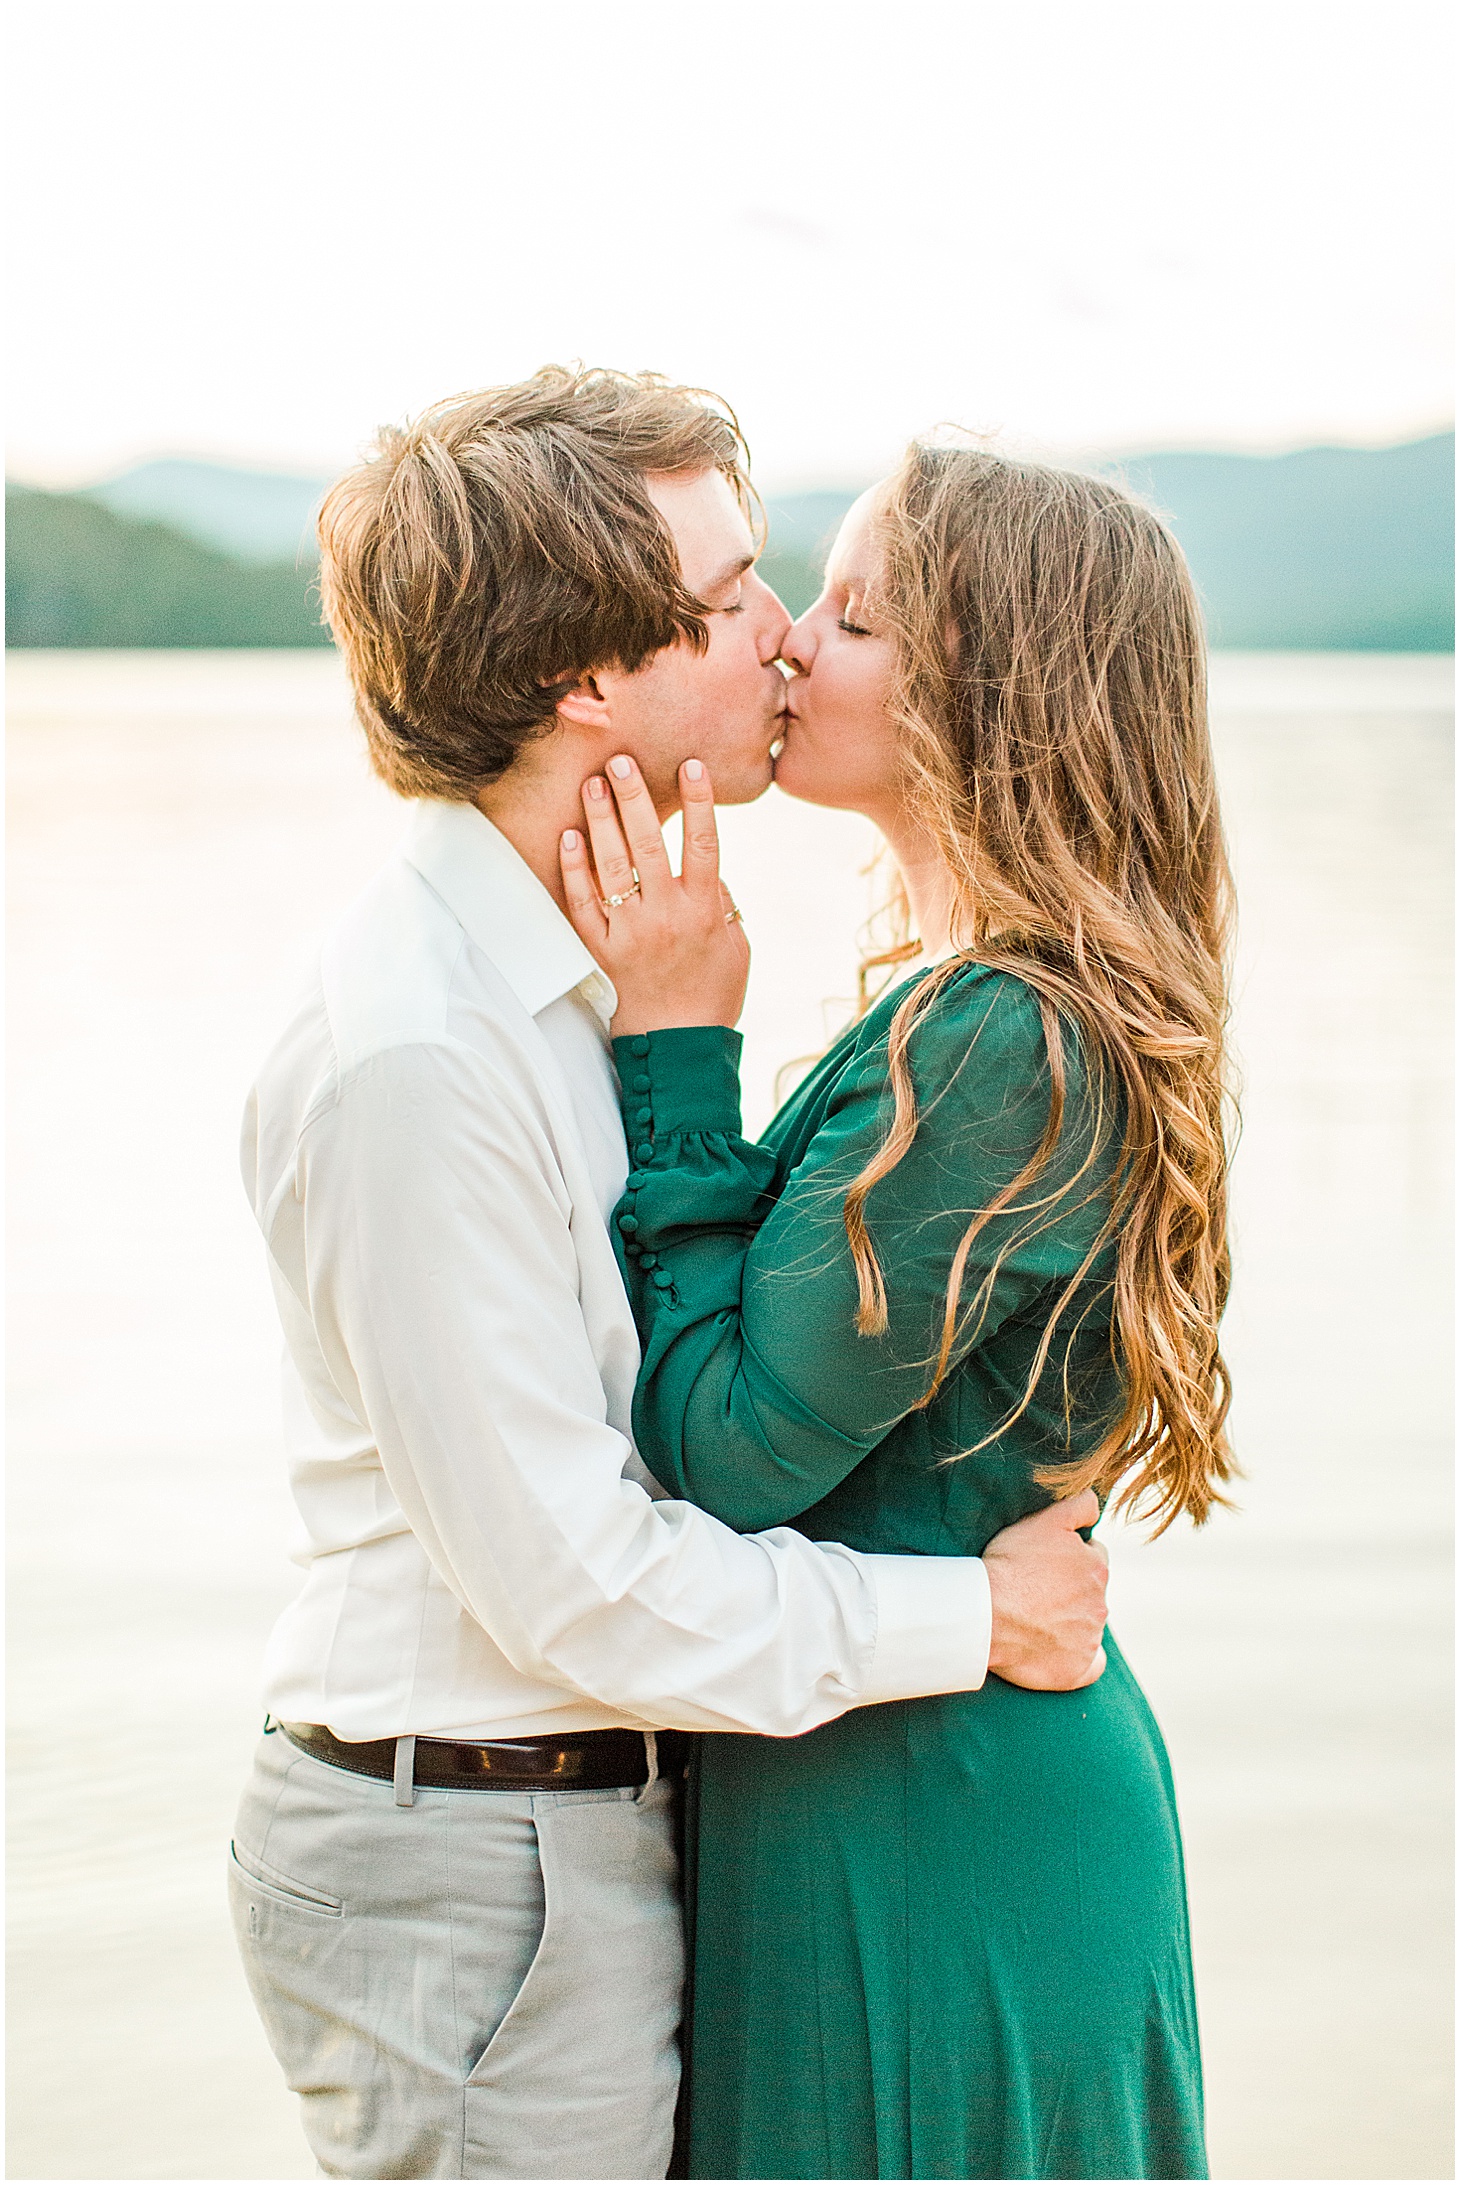 carvinscoveengagementsession_roanokeengagementsession_carvinscove_virginiawedding_virginiaweddingphotographer_vaweddingphotographer_photo_0080.jpg